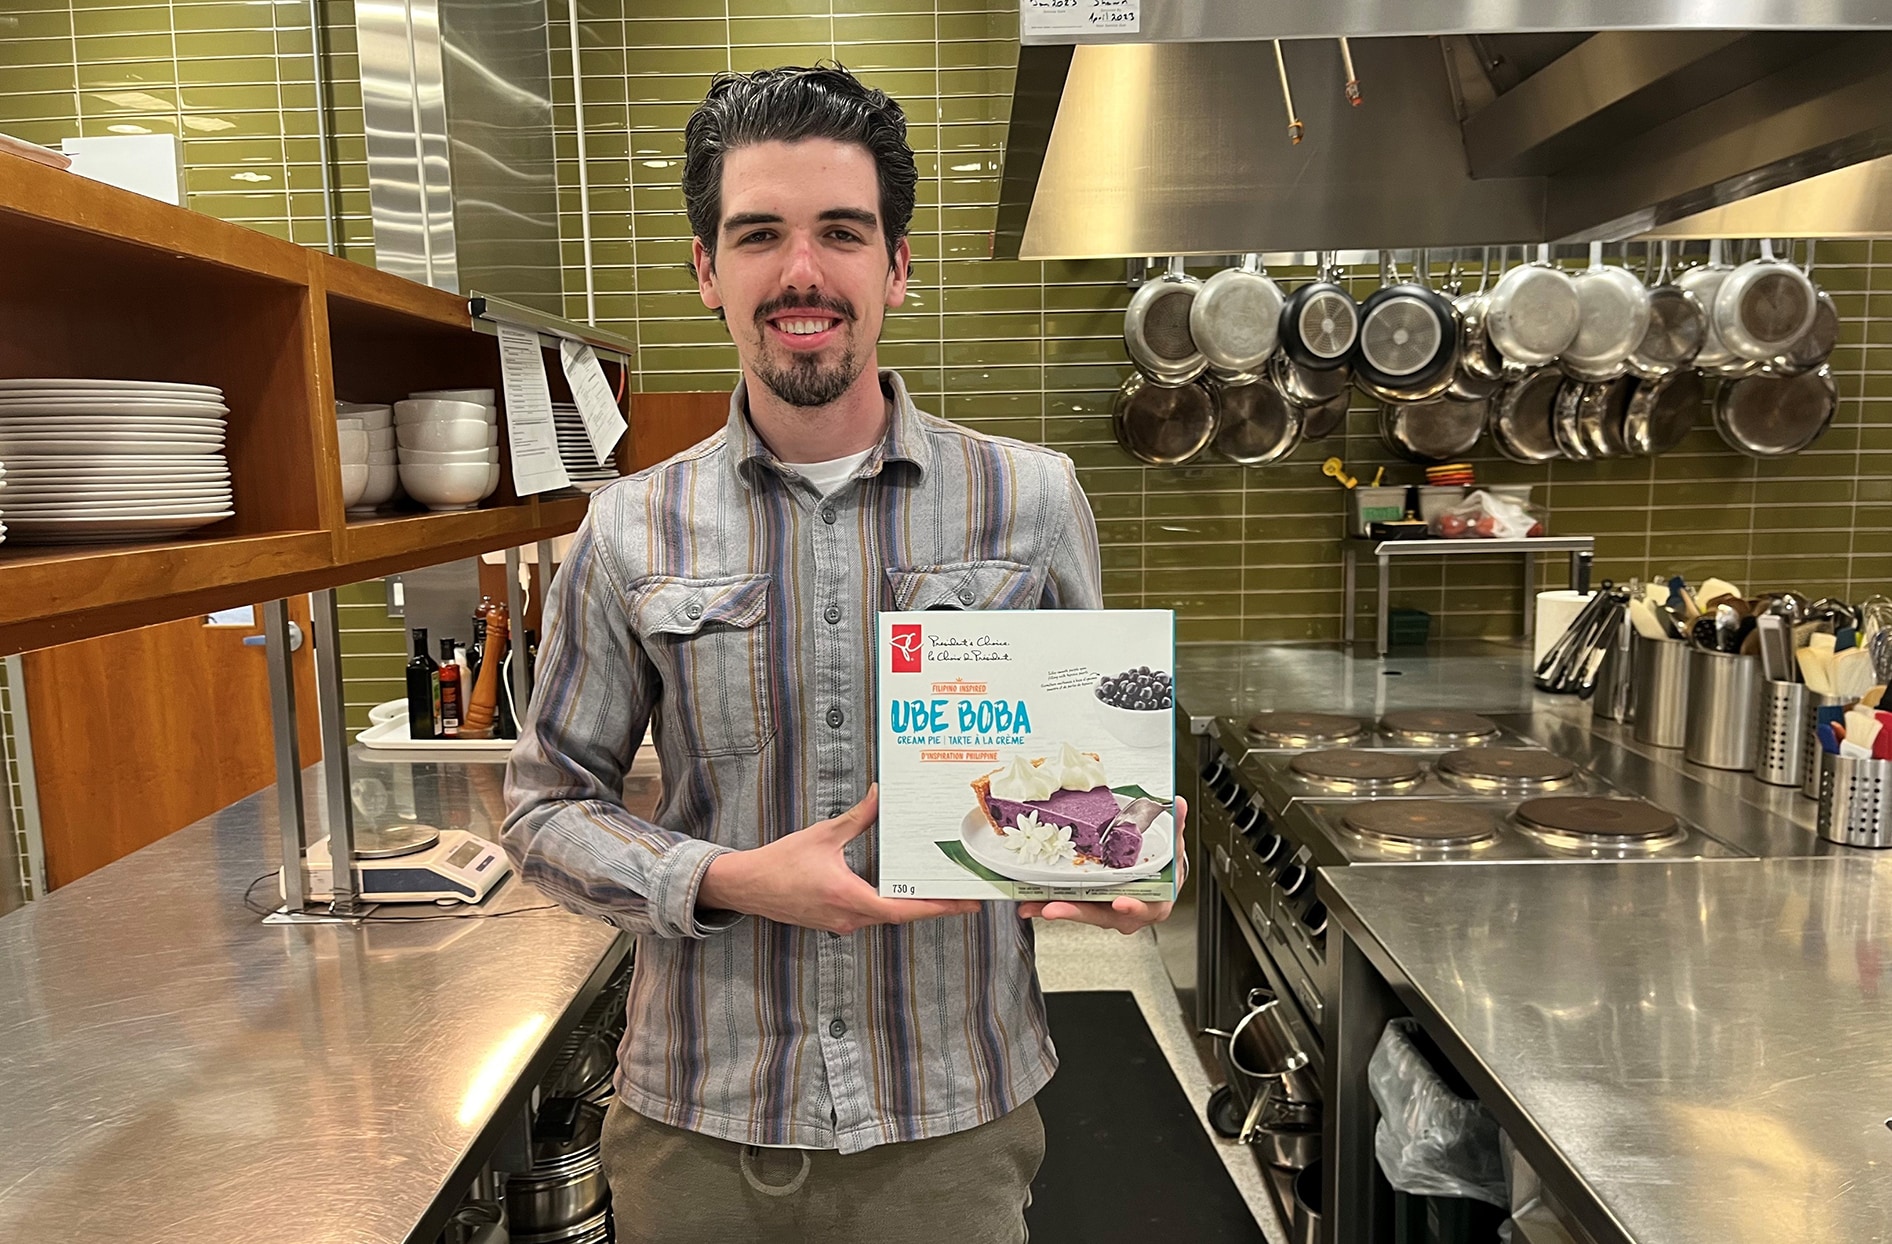 Ryan stands with the PC Ube Boba Cream Pie dessert from this year’s Summer Insiders  